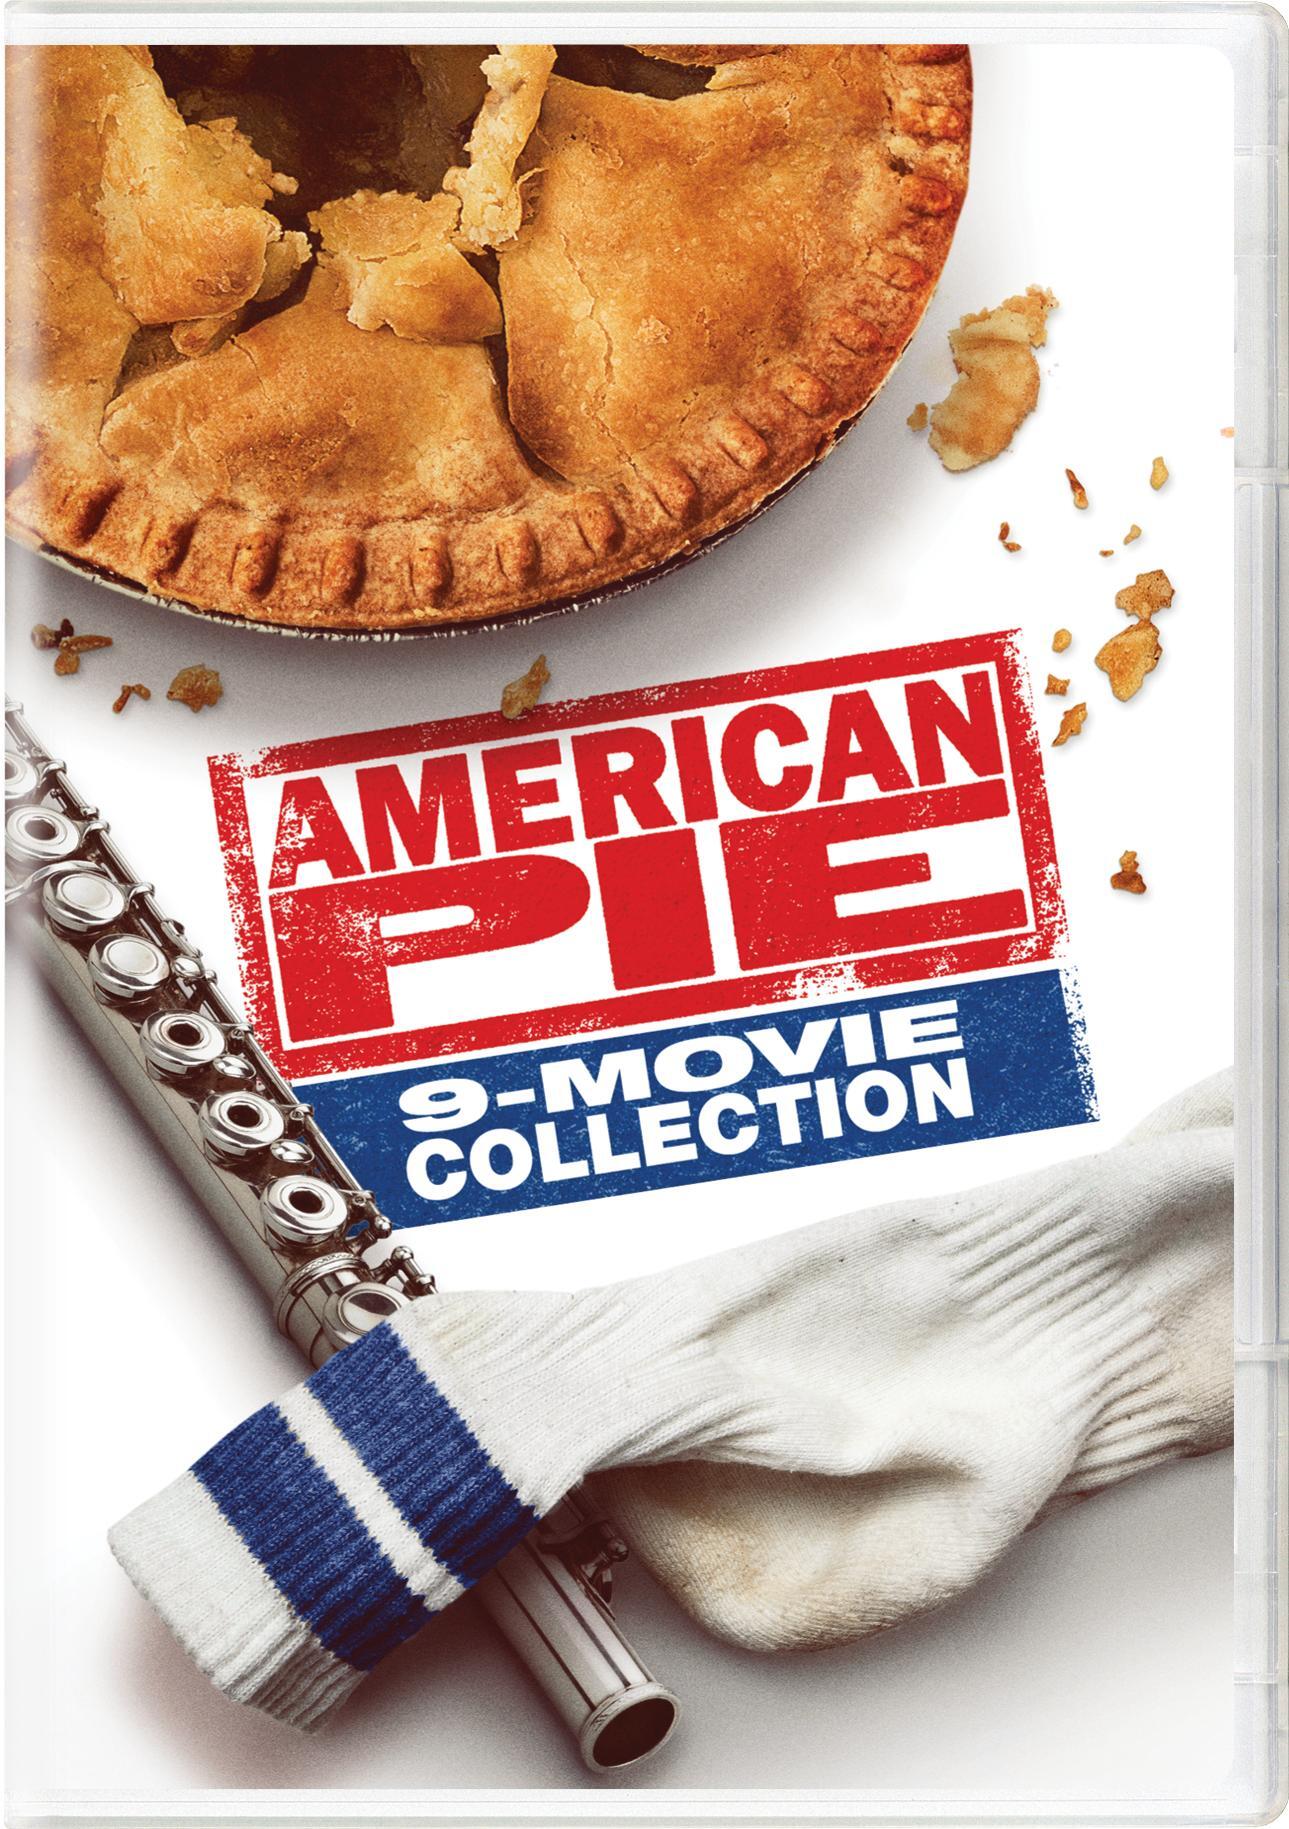 American Pie 9-movie Collection (Box Set) - DVD   - Comedy Movies On DVD - Movies On GRUV